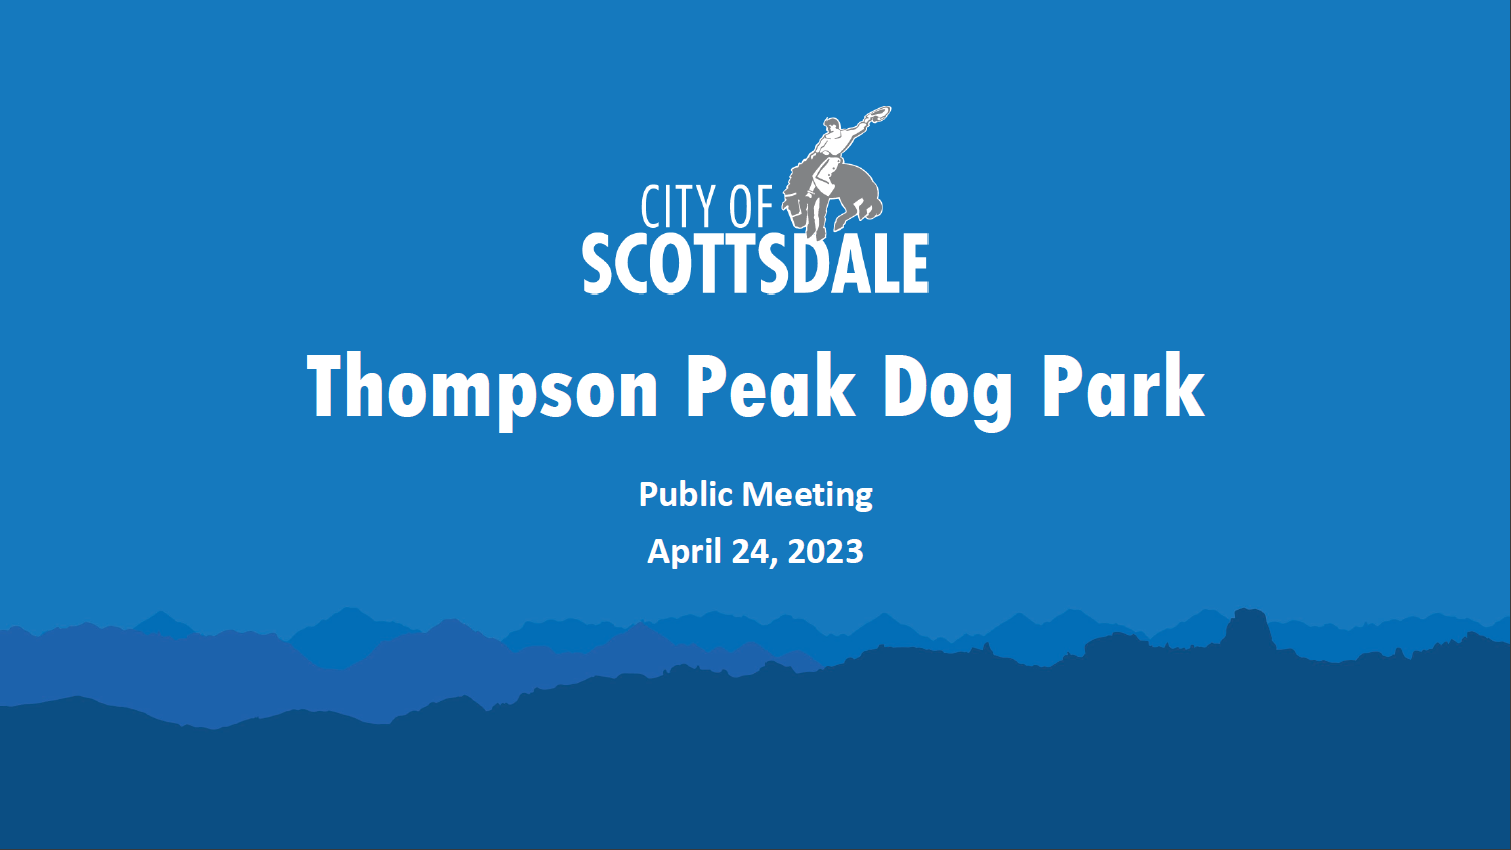 picture of thompson peak dog park presentation slide 1 which includes the presentation date of april 24, 2023